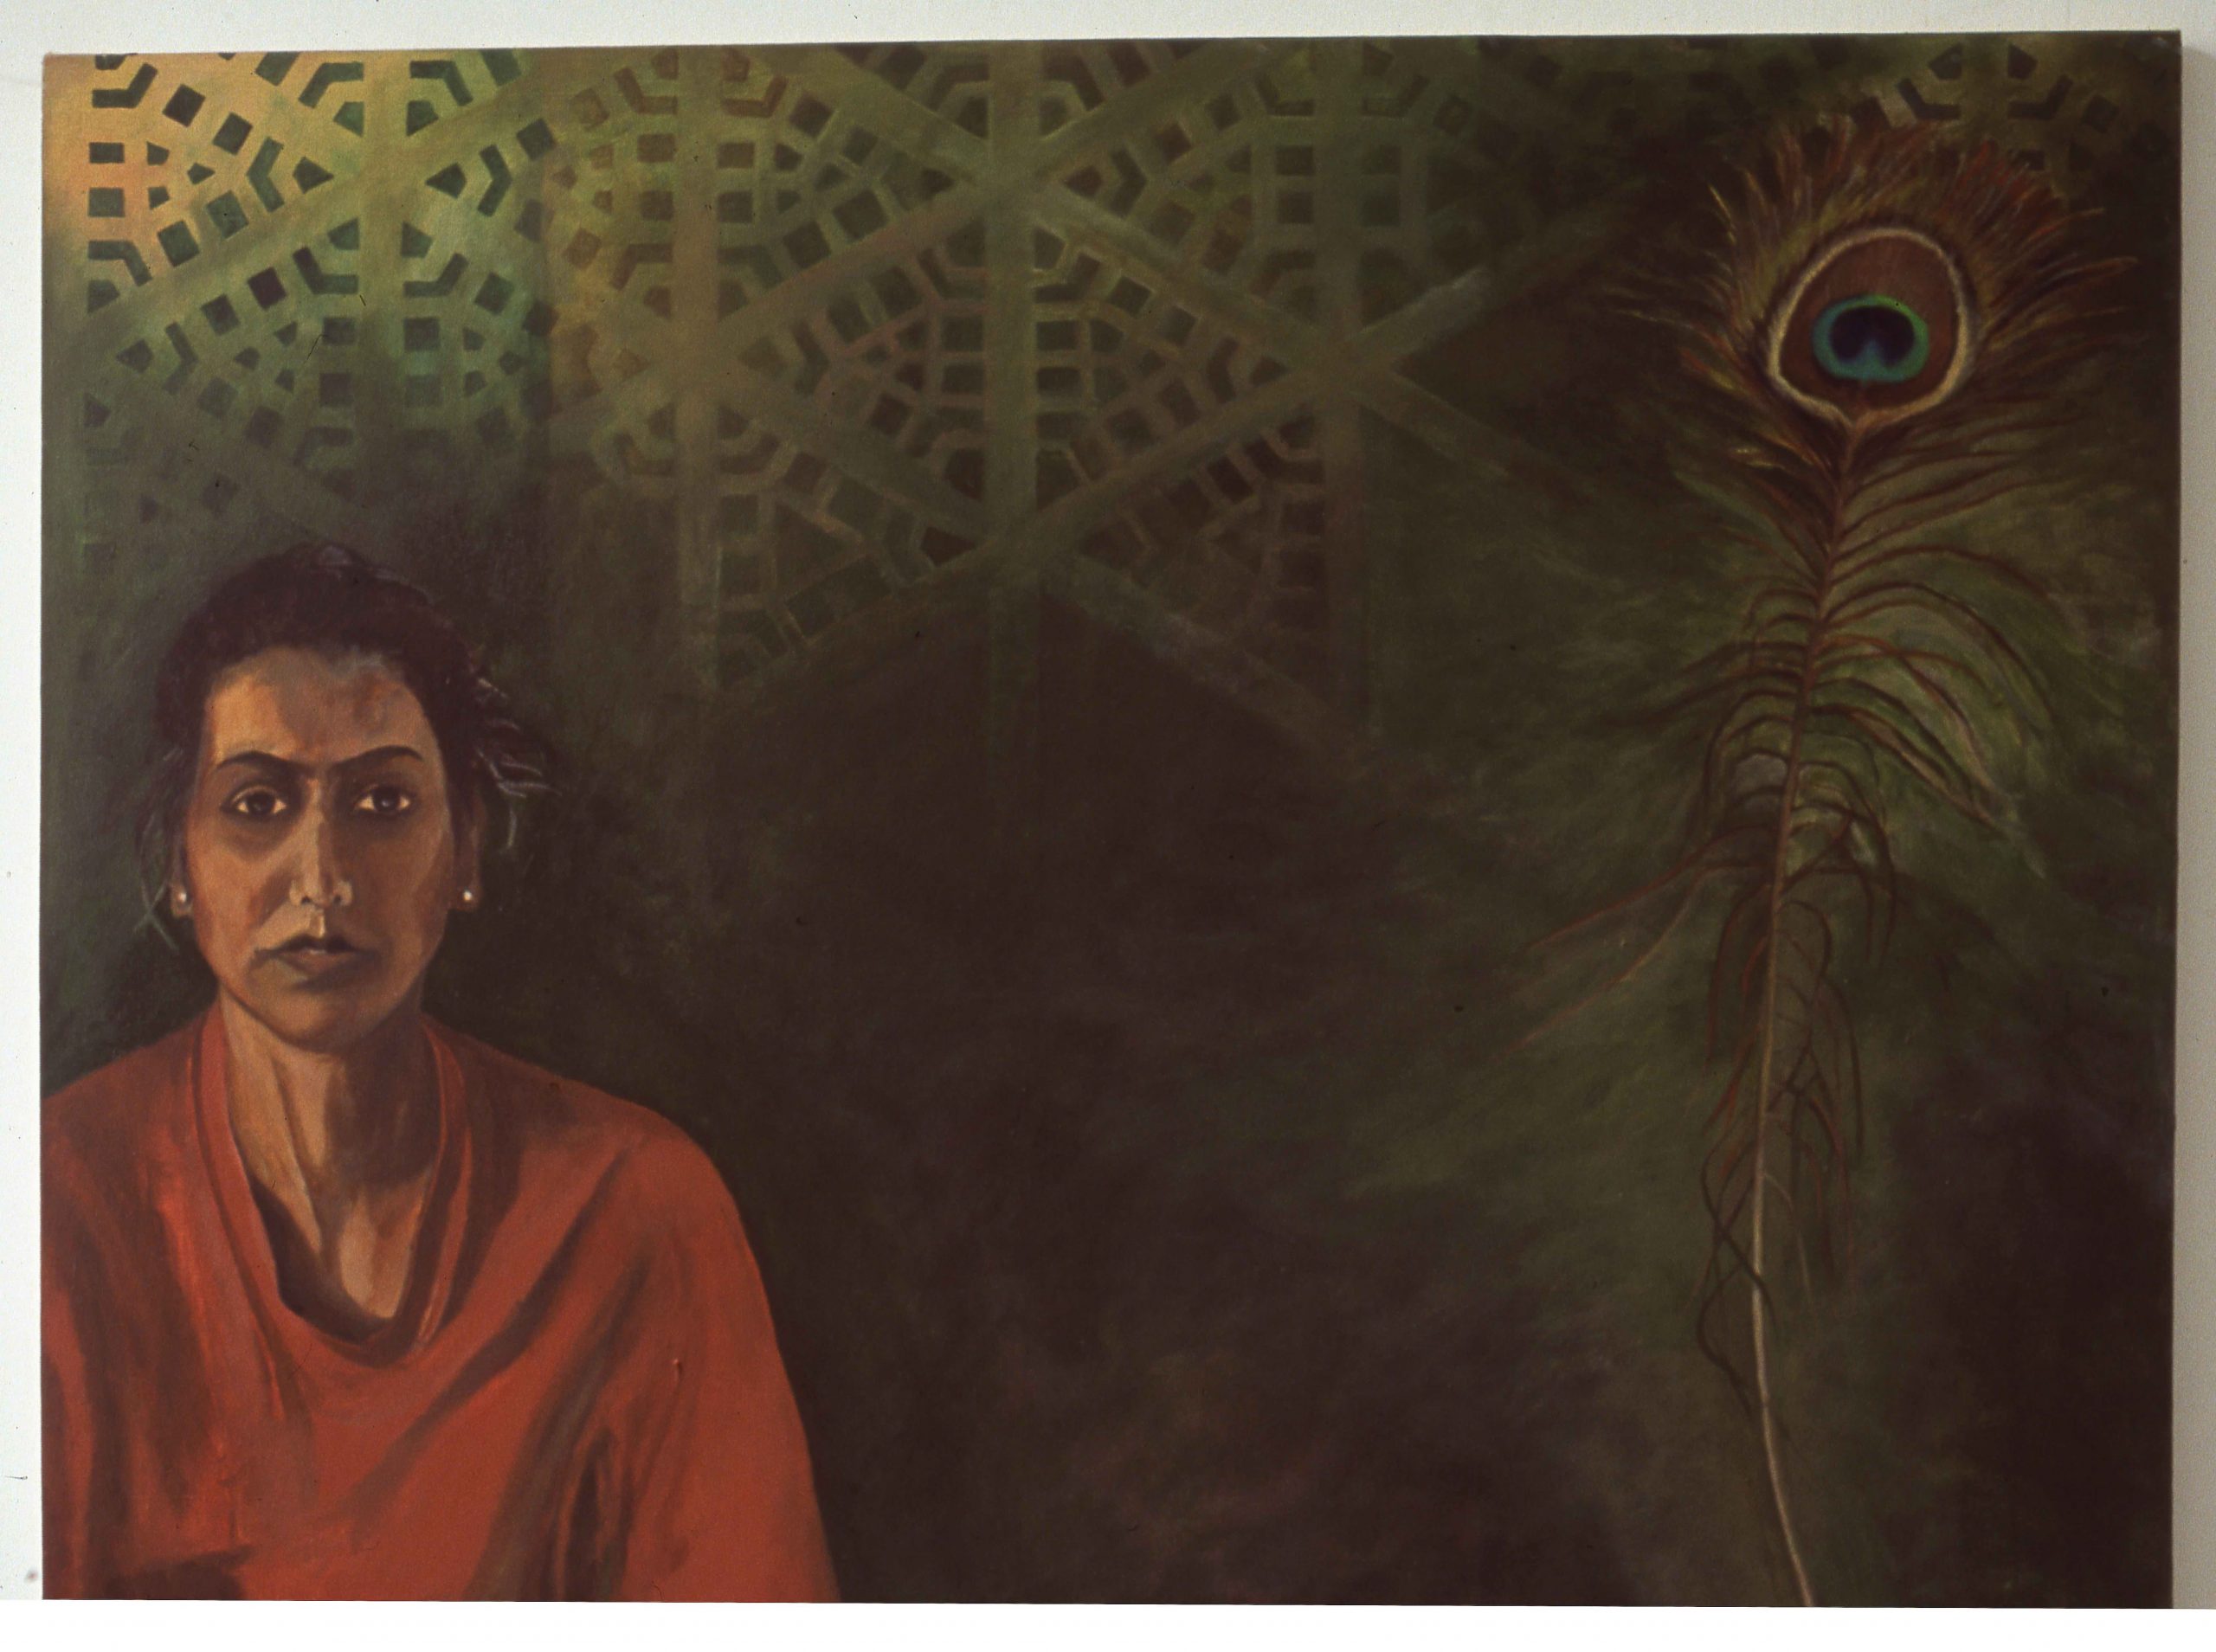 A painted self portrait of the artist in a red top, to the left of a dark space, a peacock feather in the darkness to the right